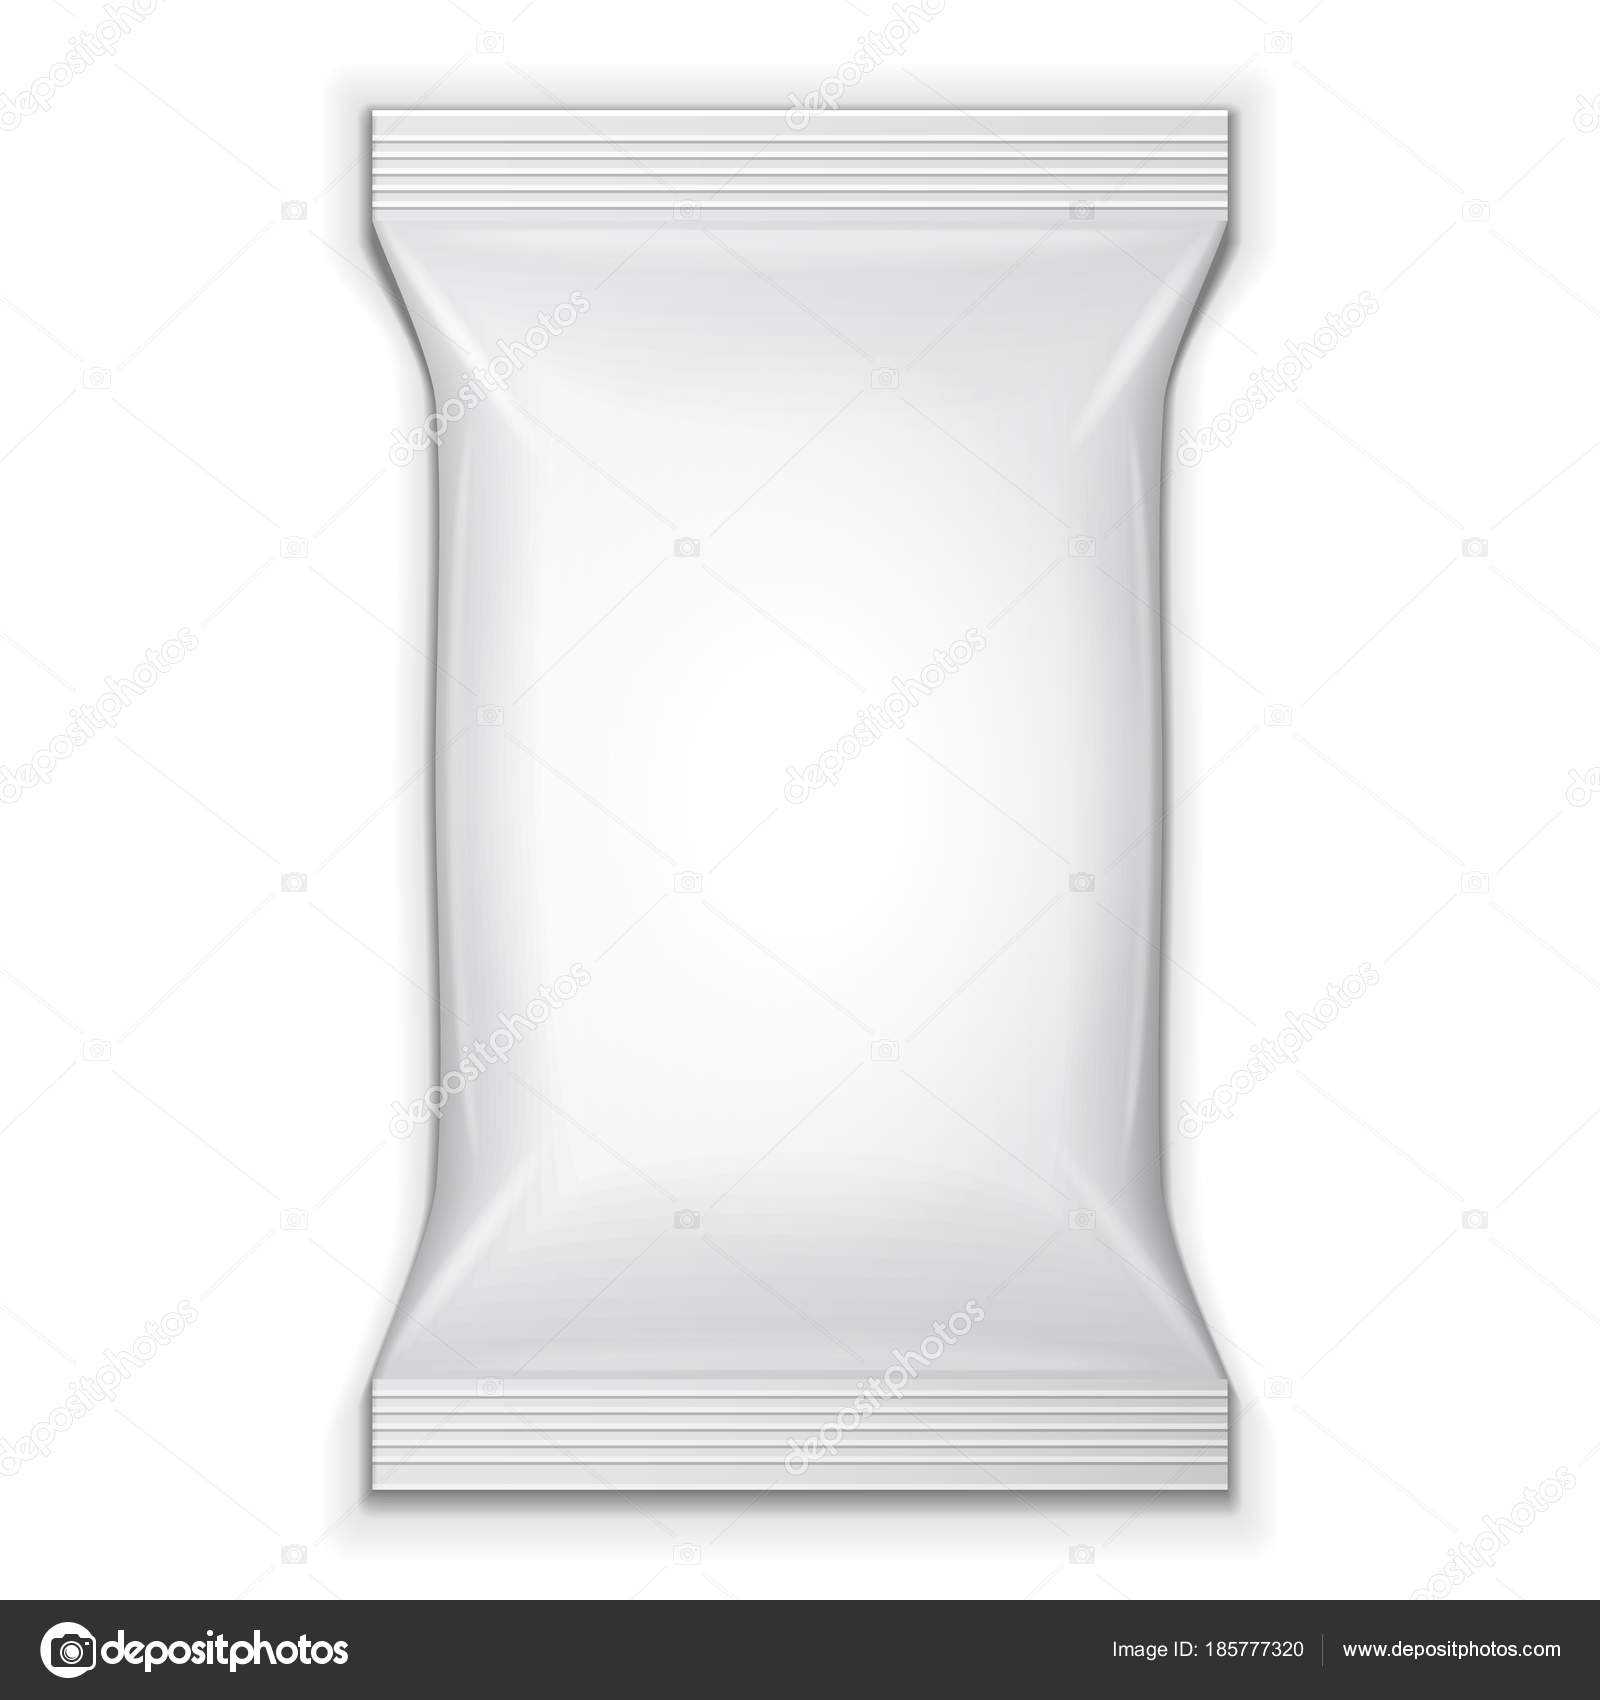 Blank Foil Food Snack Sachet Bag Packaging For Sweets, Chips For Blank Packaging Templates